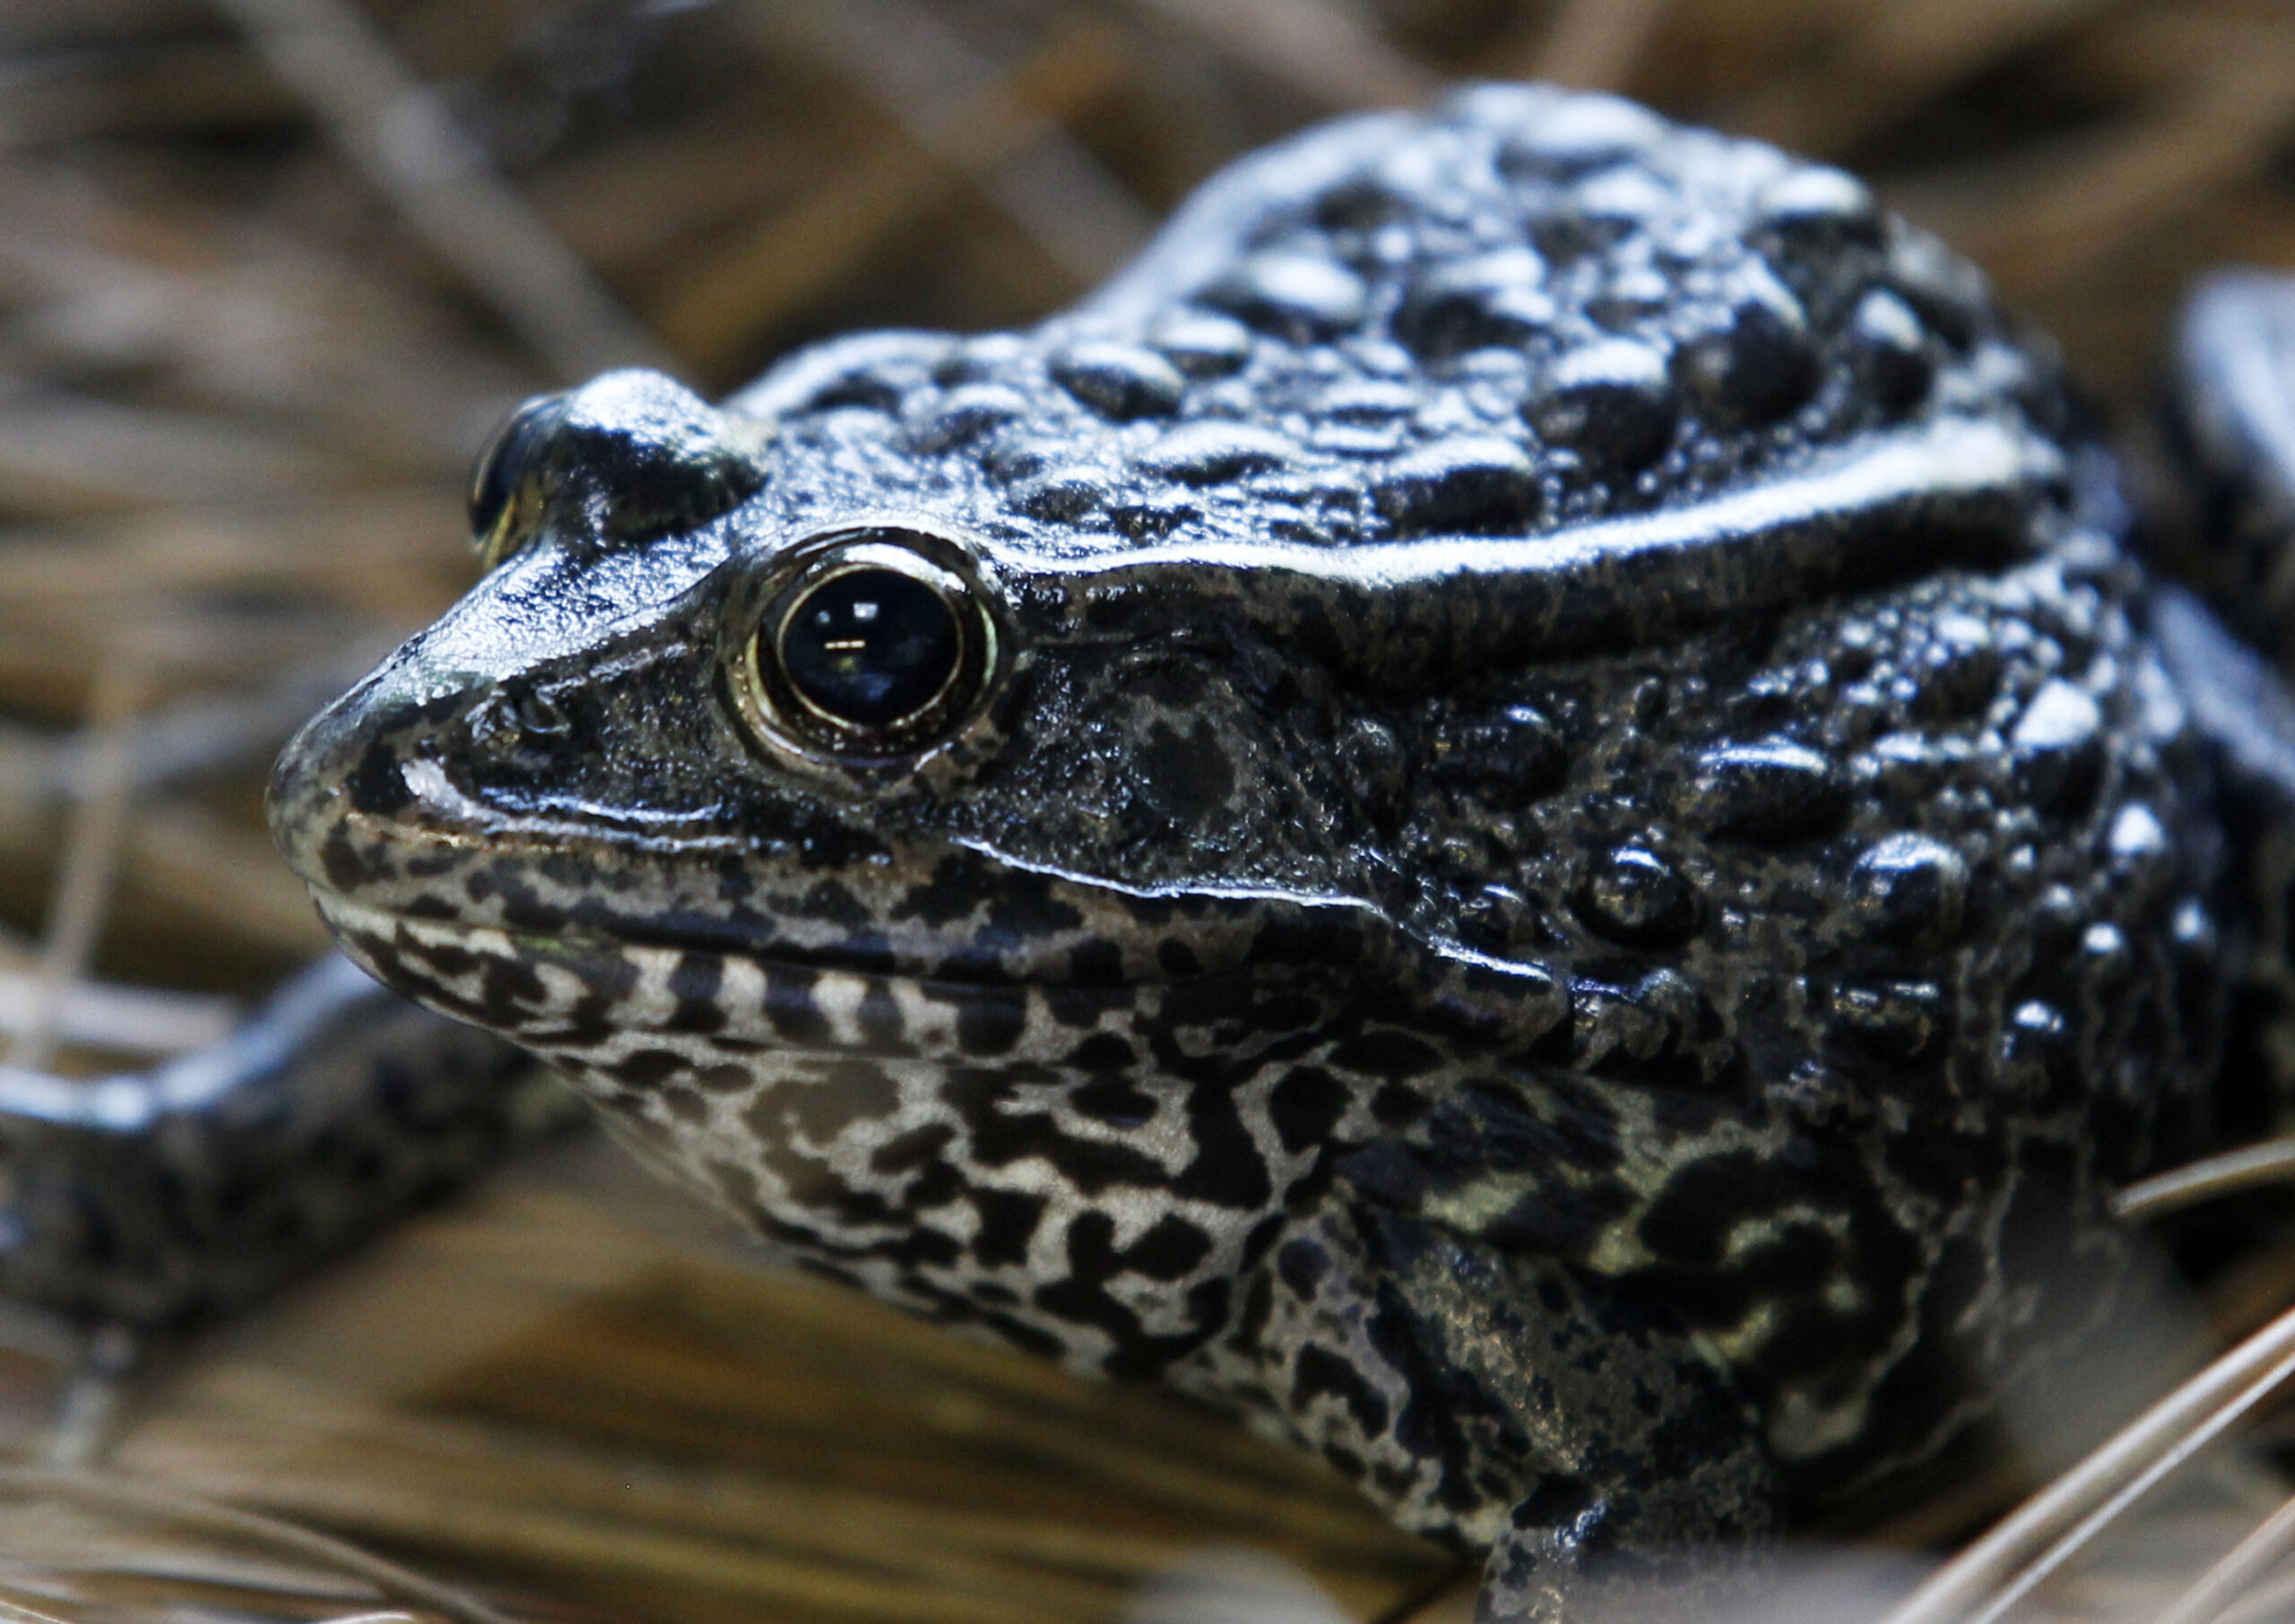 FILE - This Sept. 27, 2011, file photo, shows a gopher frog at the Audubon Zoo in New Orleans. The Biden administration is canceling two environmental rollbacks under former President Donald Trump that limited habitat protections for imperiled plants and wildlife. The dusky gopher frog survives in just a few ponds in Mississippi. (AP Photo/Gerald Herbert, File)